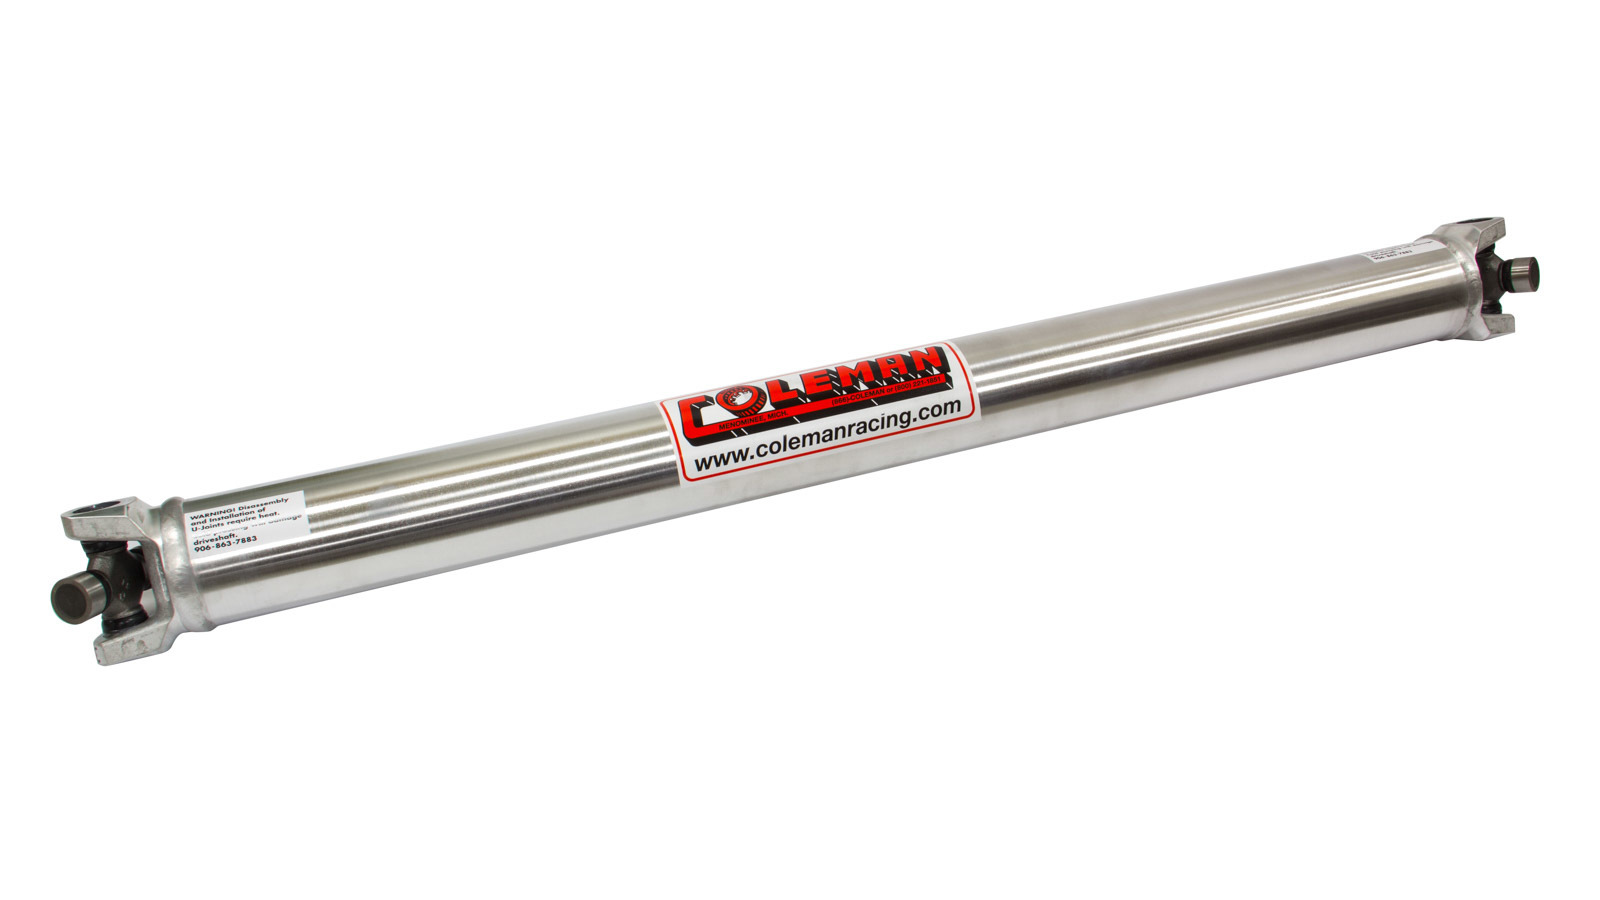 Coleman Racing Products 16614 Drive Shaft, 41 in Long, 3 in OD, 1310 U-Joints, Aluminum, Natural, Universal, Each